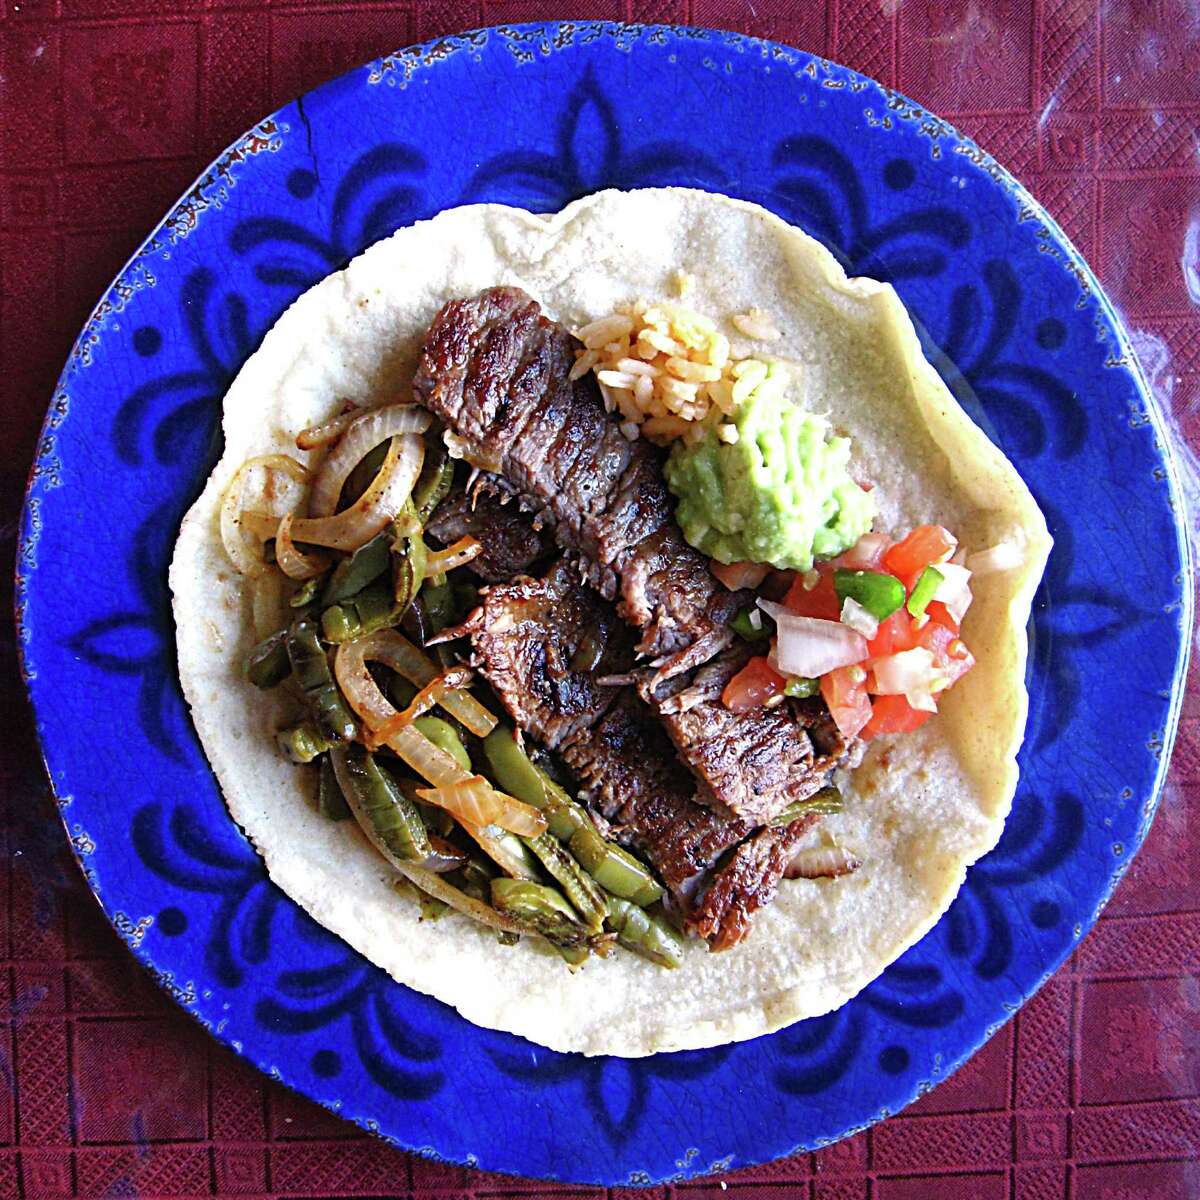 A carne asada taco on a handmade flour tortilla from Taquería Potrillo. Built from a plate that includes grilled nopales, grilled onions, pico, rice beans and guacamole.